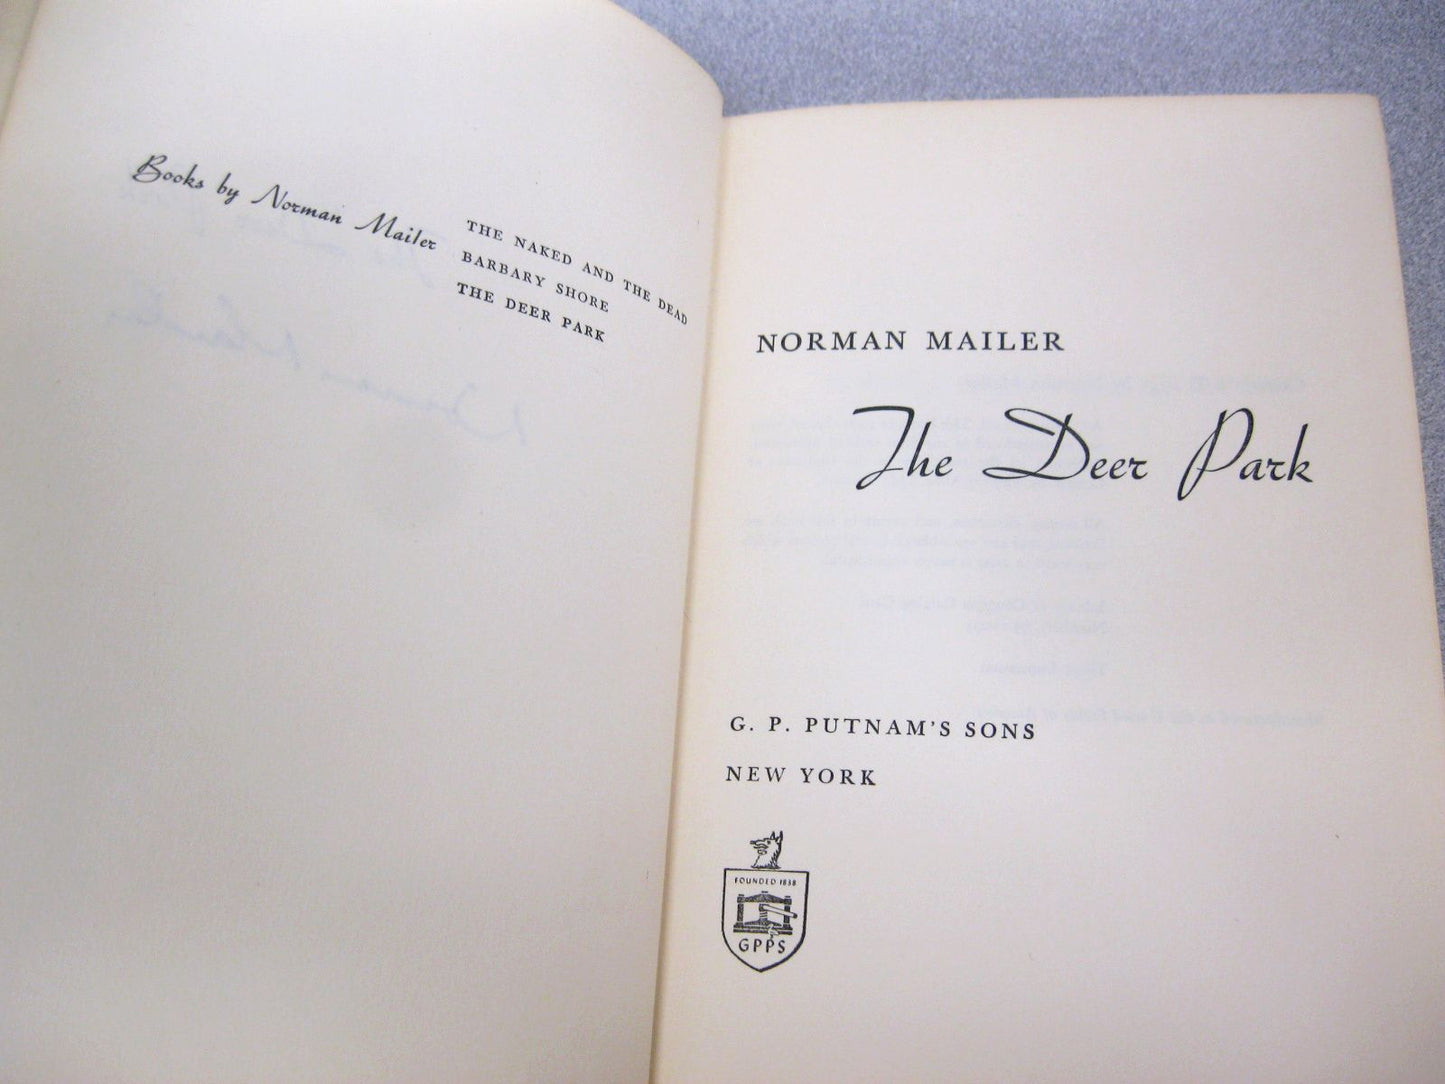 The Deer Park by Norman Mailer